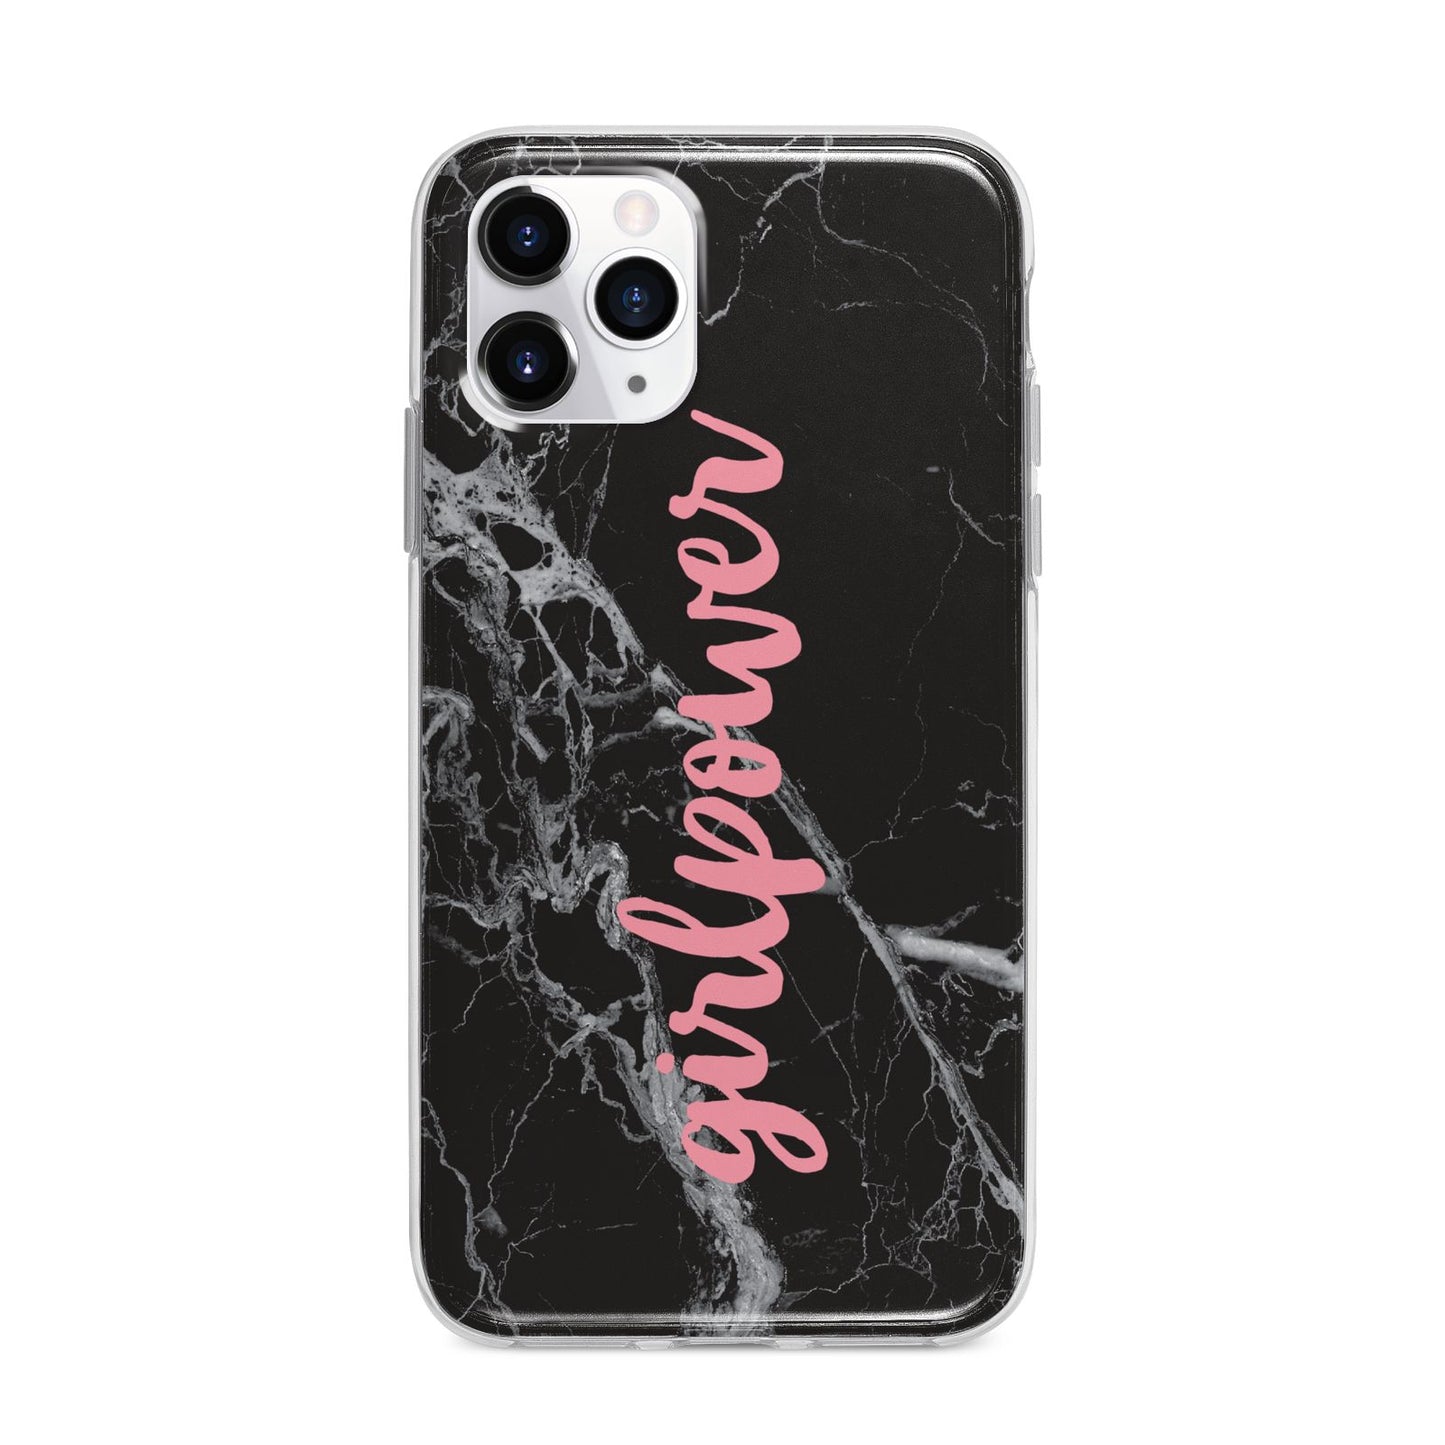 Girlpower Black White Marble Effect Apple iPhone 11 Pro Max in Silver with Bumper Case